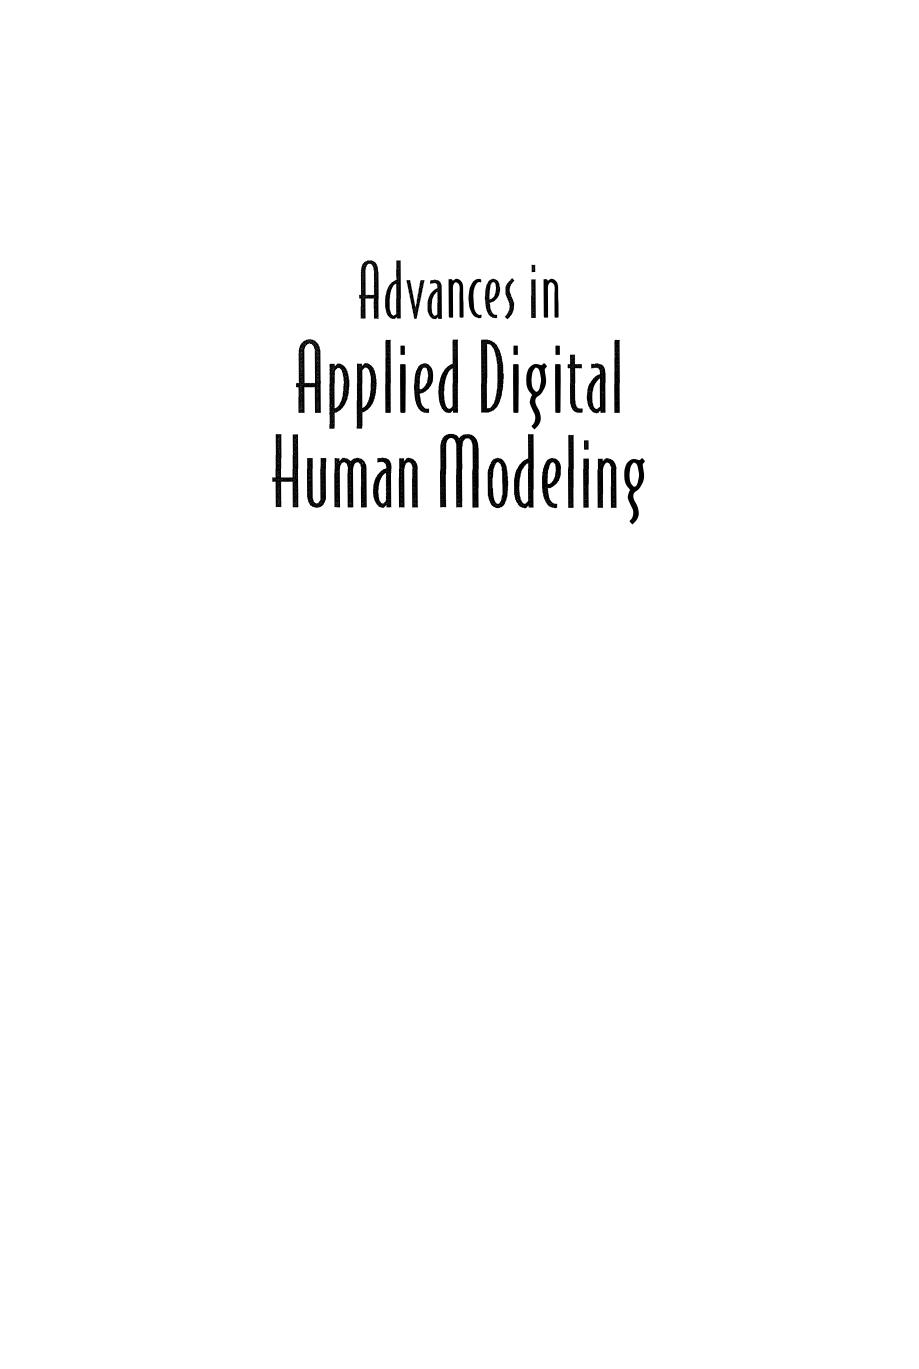 Advances in Applied Digital Human Modeling (2010) by Vincent G. Duffy